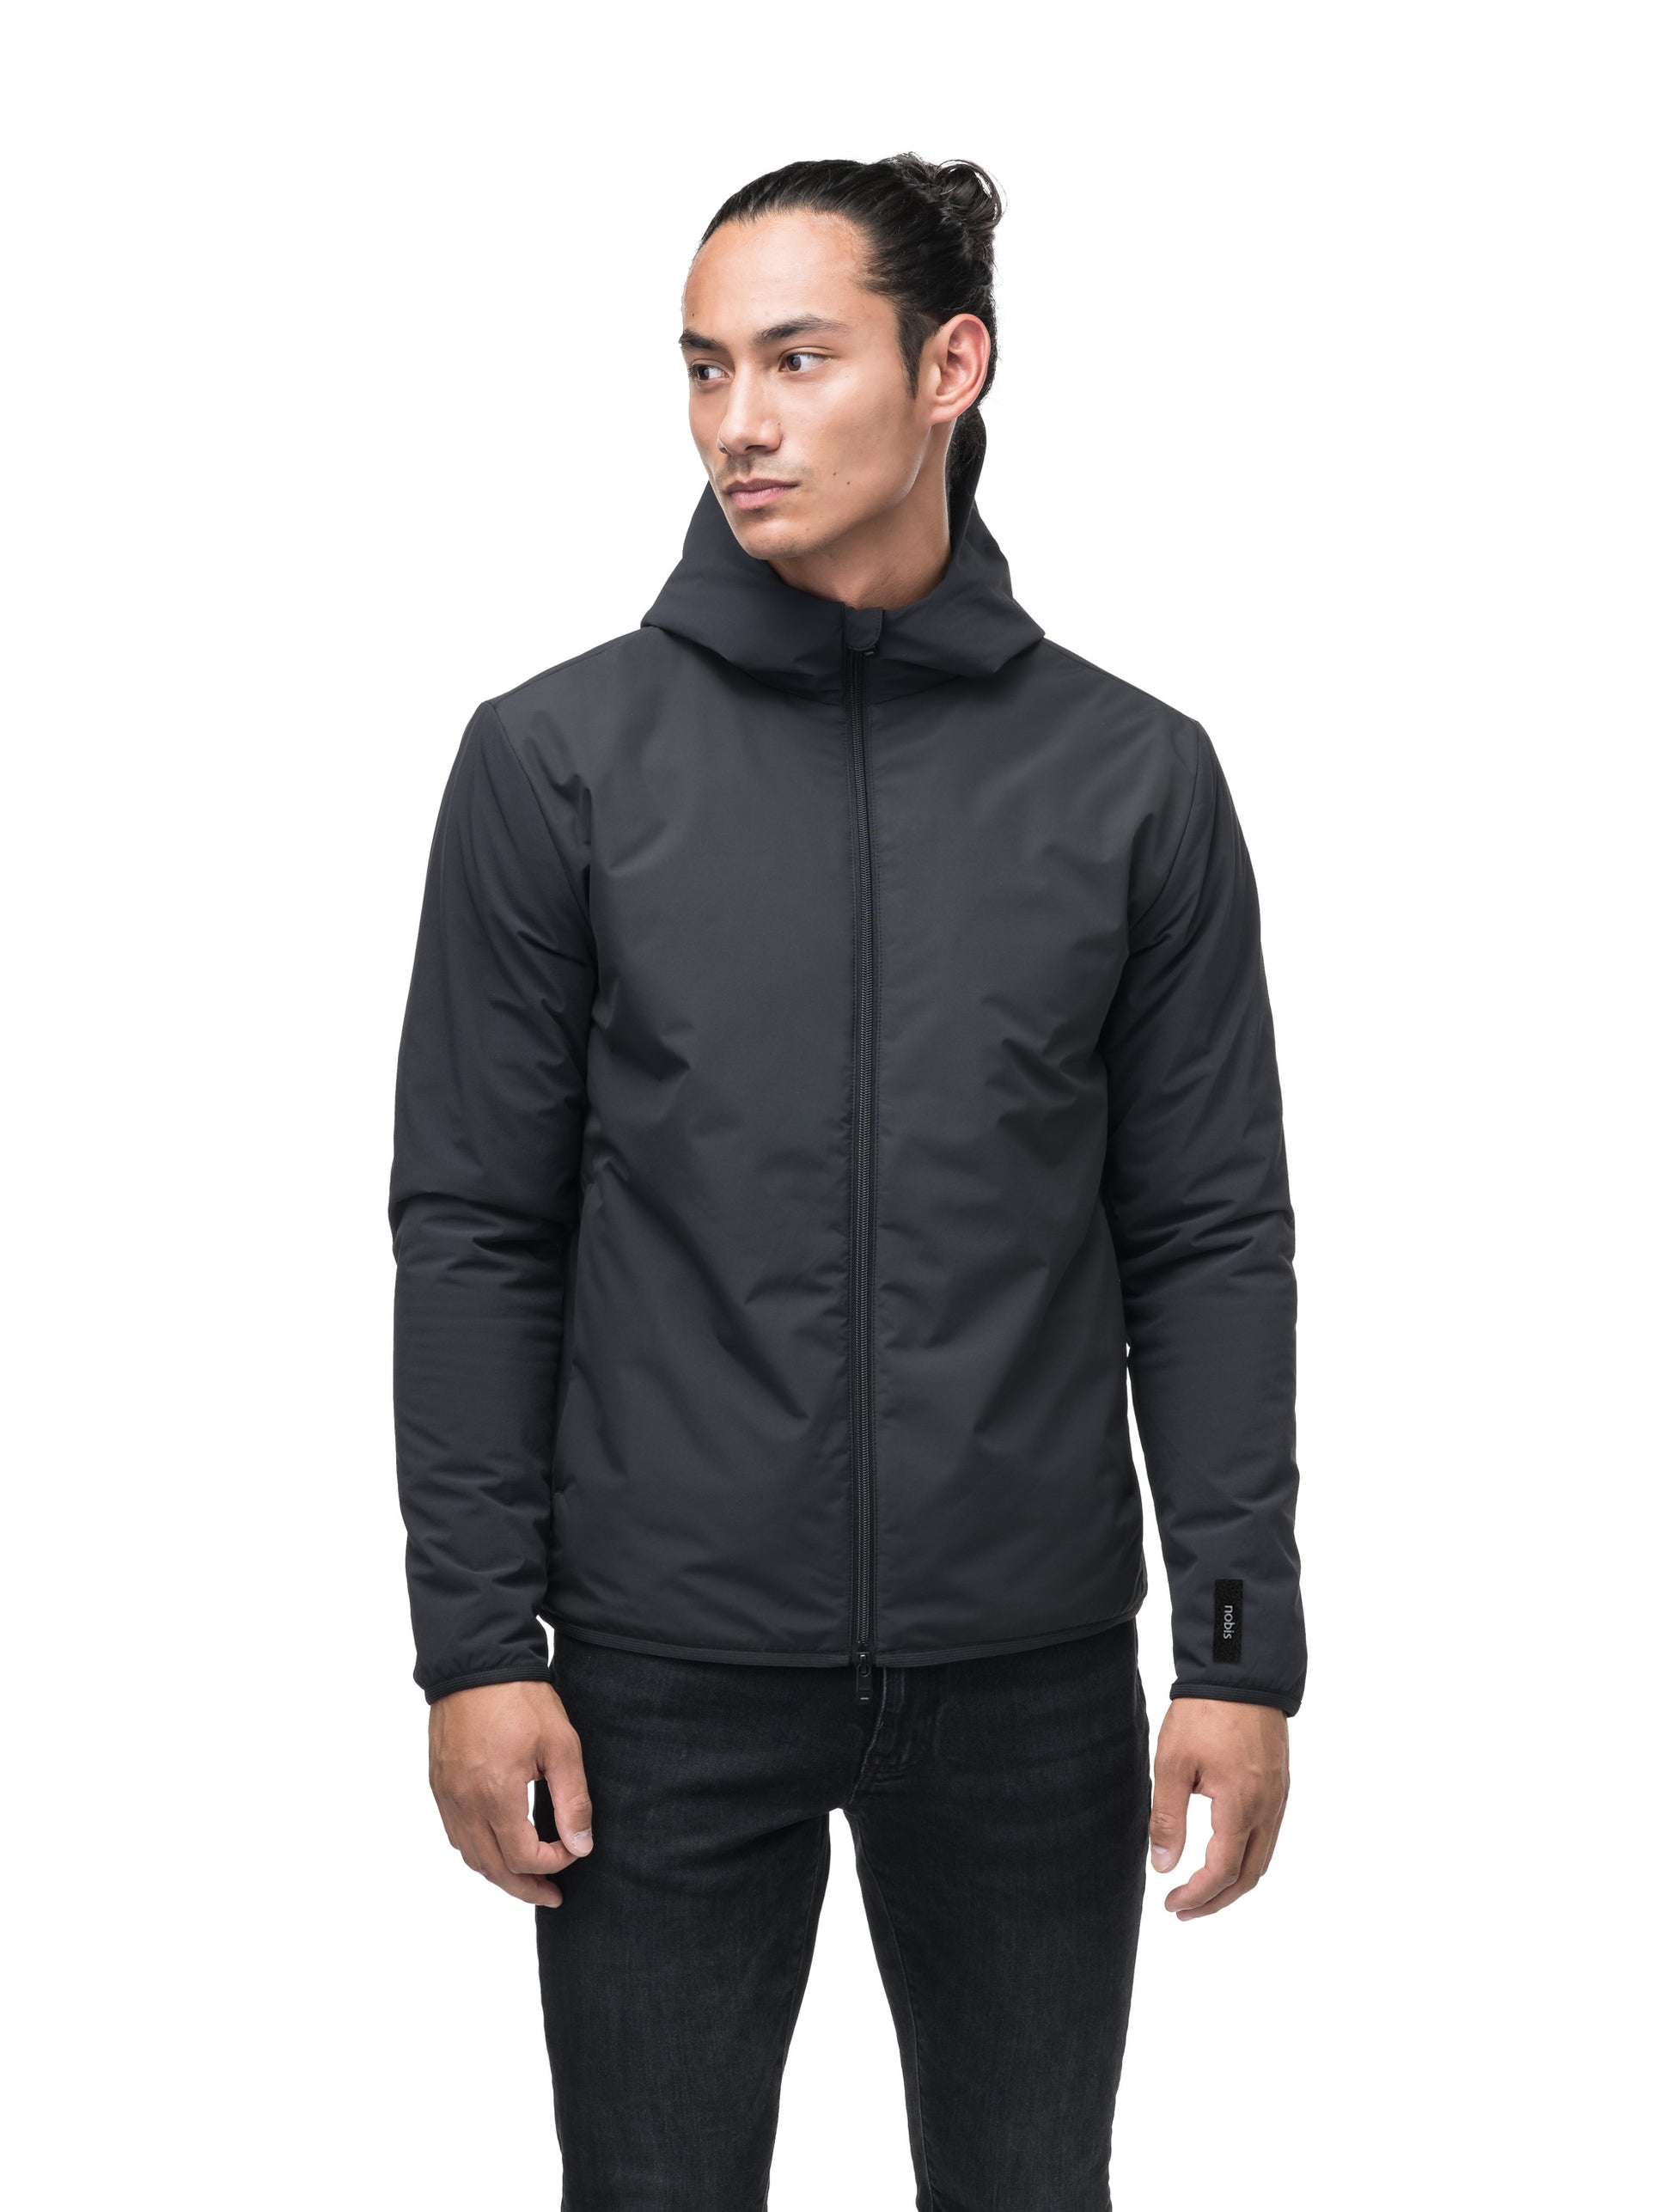 Men's hip length mid layer jacket with non-removable hood and two-way zipper in Black